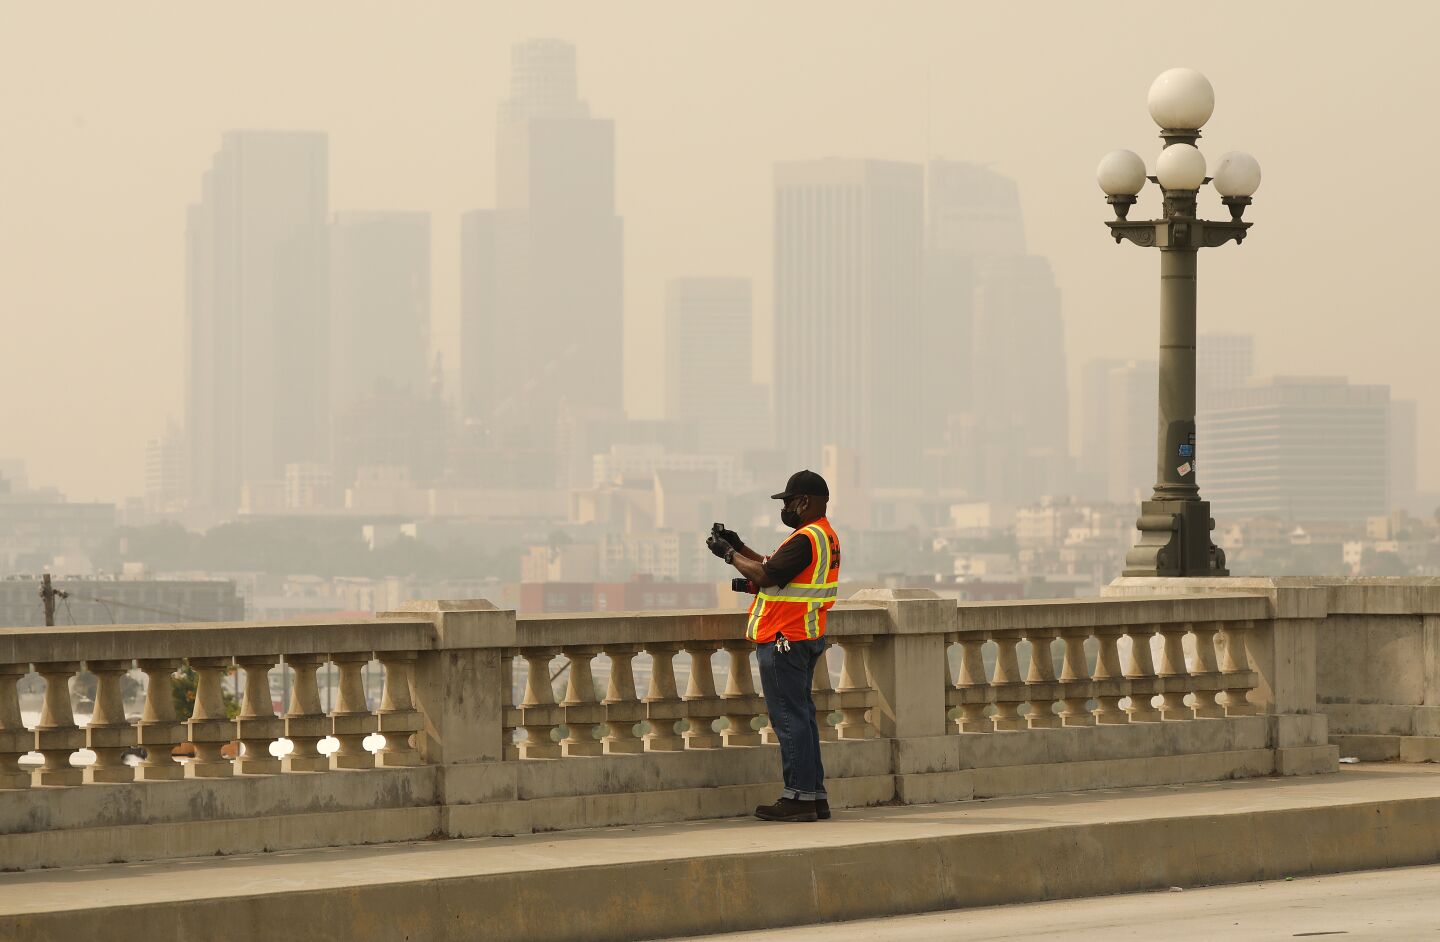 Brooks Hubbard with the U.S. Army Corps of Engineers takes photos from the historic North Broadway Bridge over the Los Angeles River Tuesday morning as smoke and ash from the Bobcat fire cloak the area.